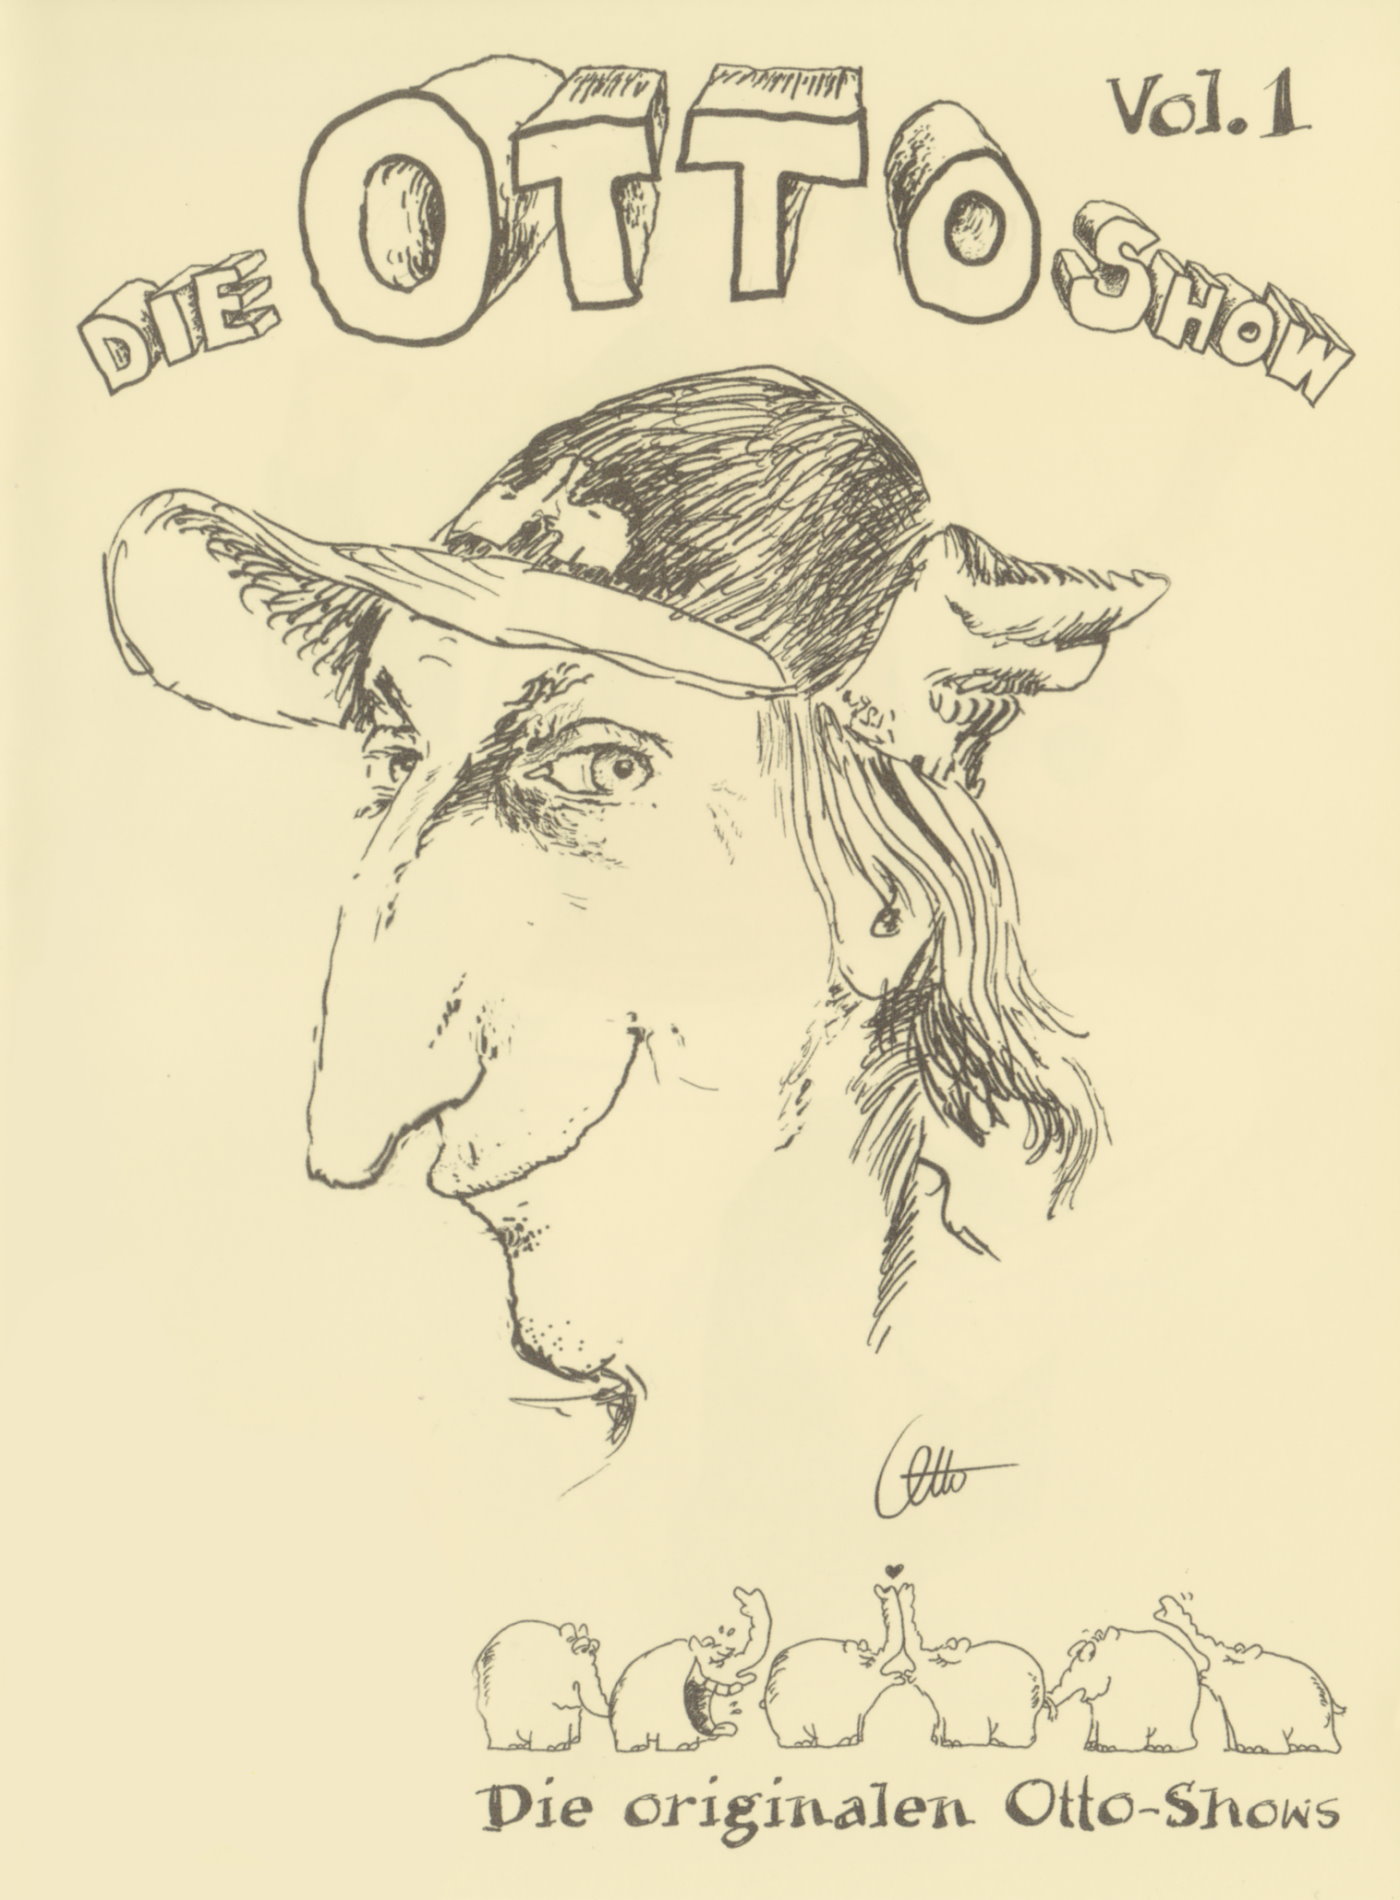 Cover - Die Otto Show.jpg